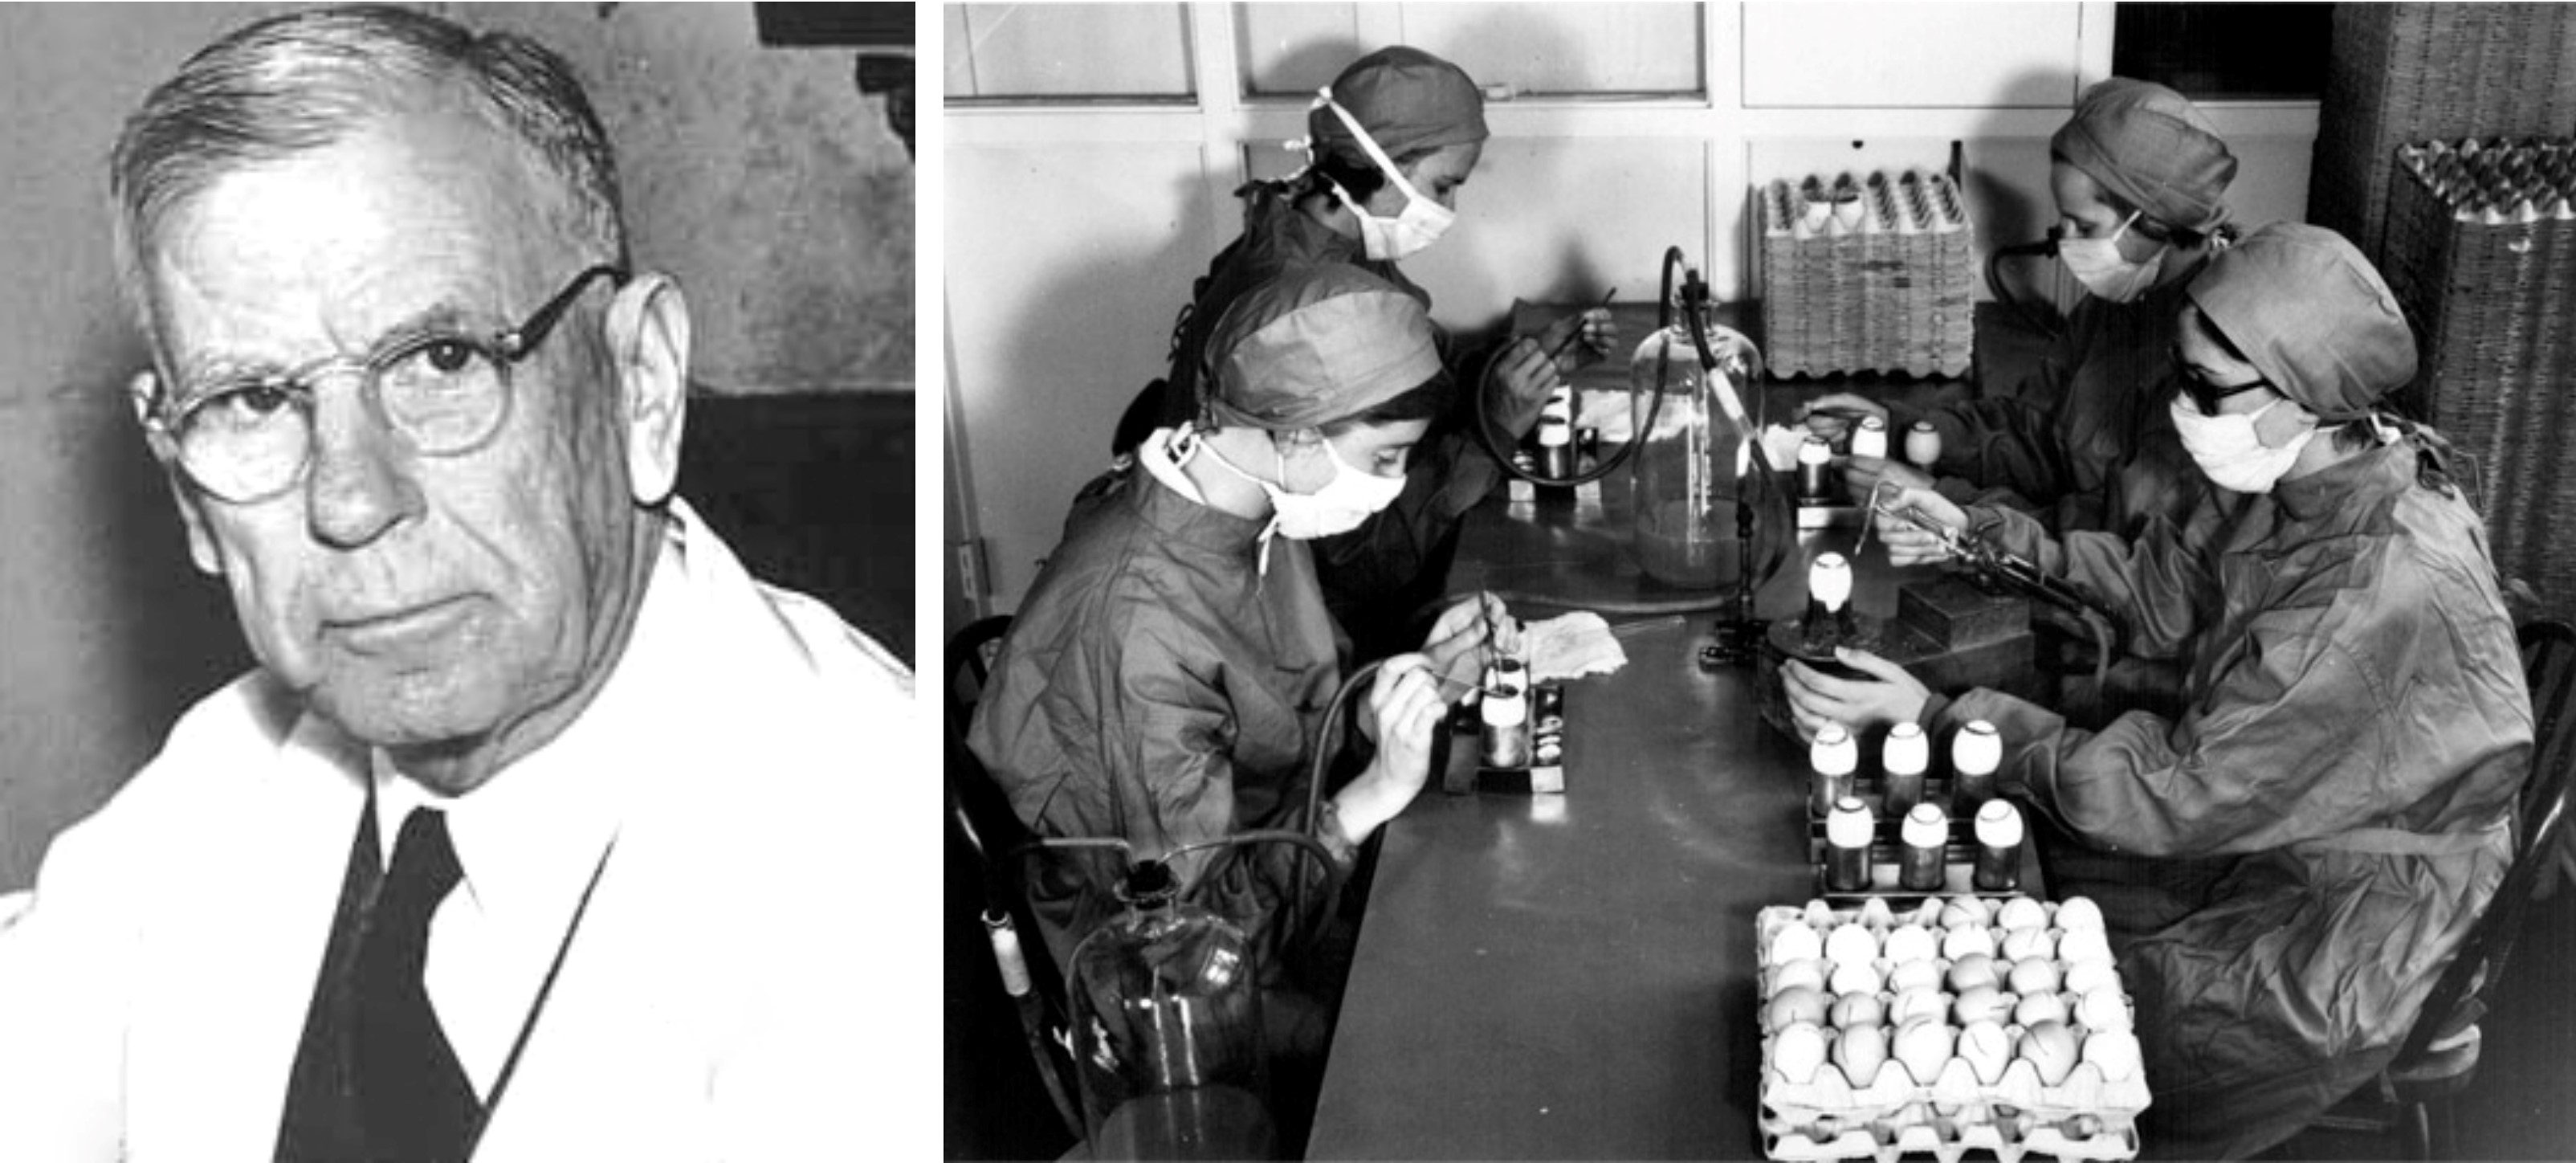 On the left, Dr. Ernest Goodpasture. On the right, preparation of influenza vaccine in Connaught Laboratories.